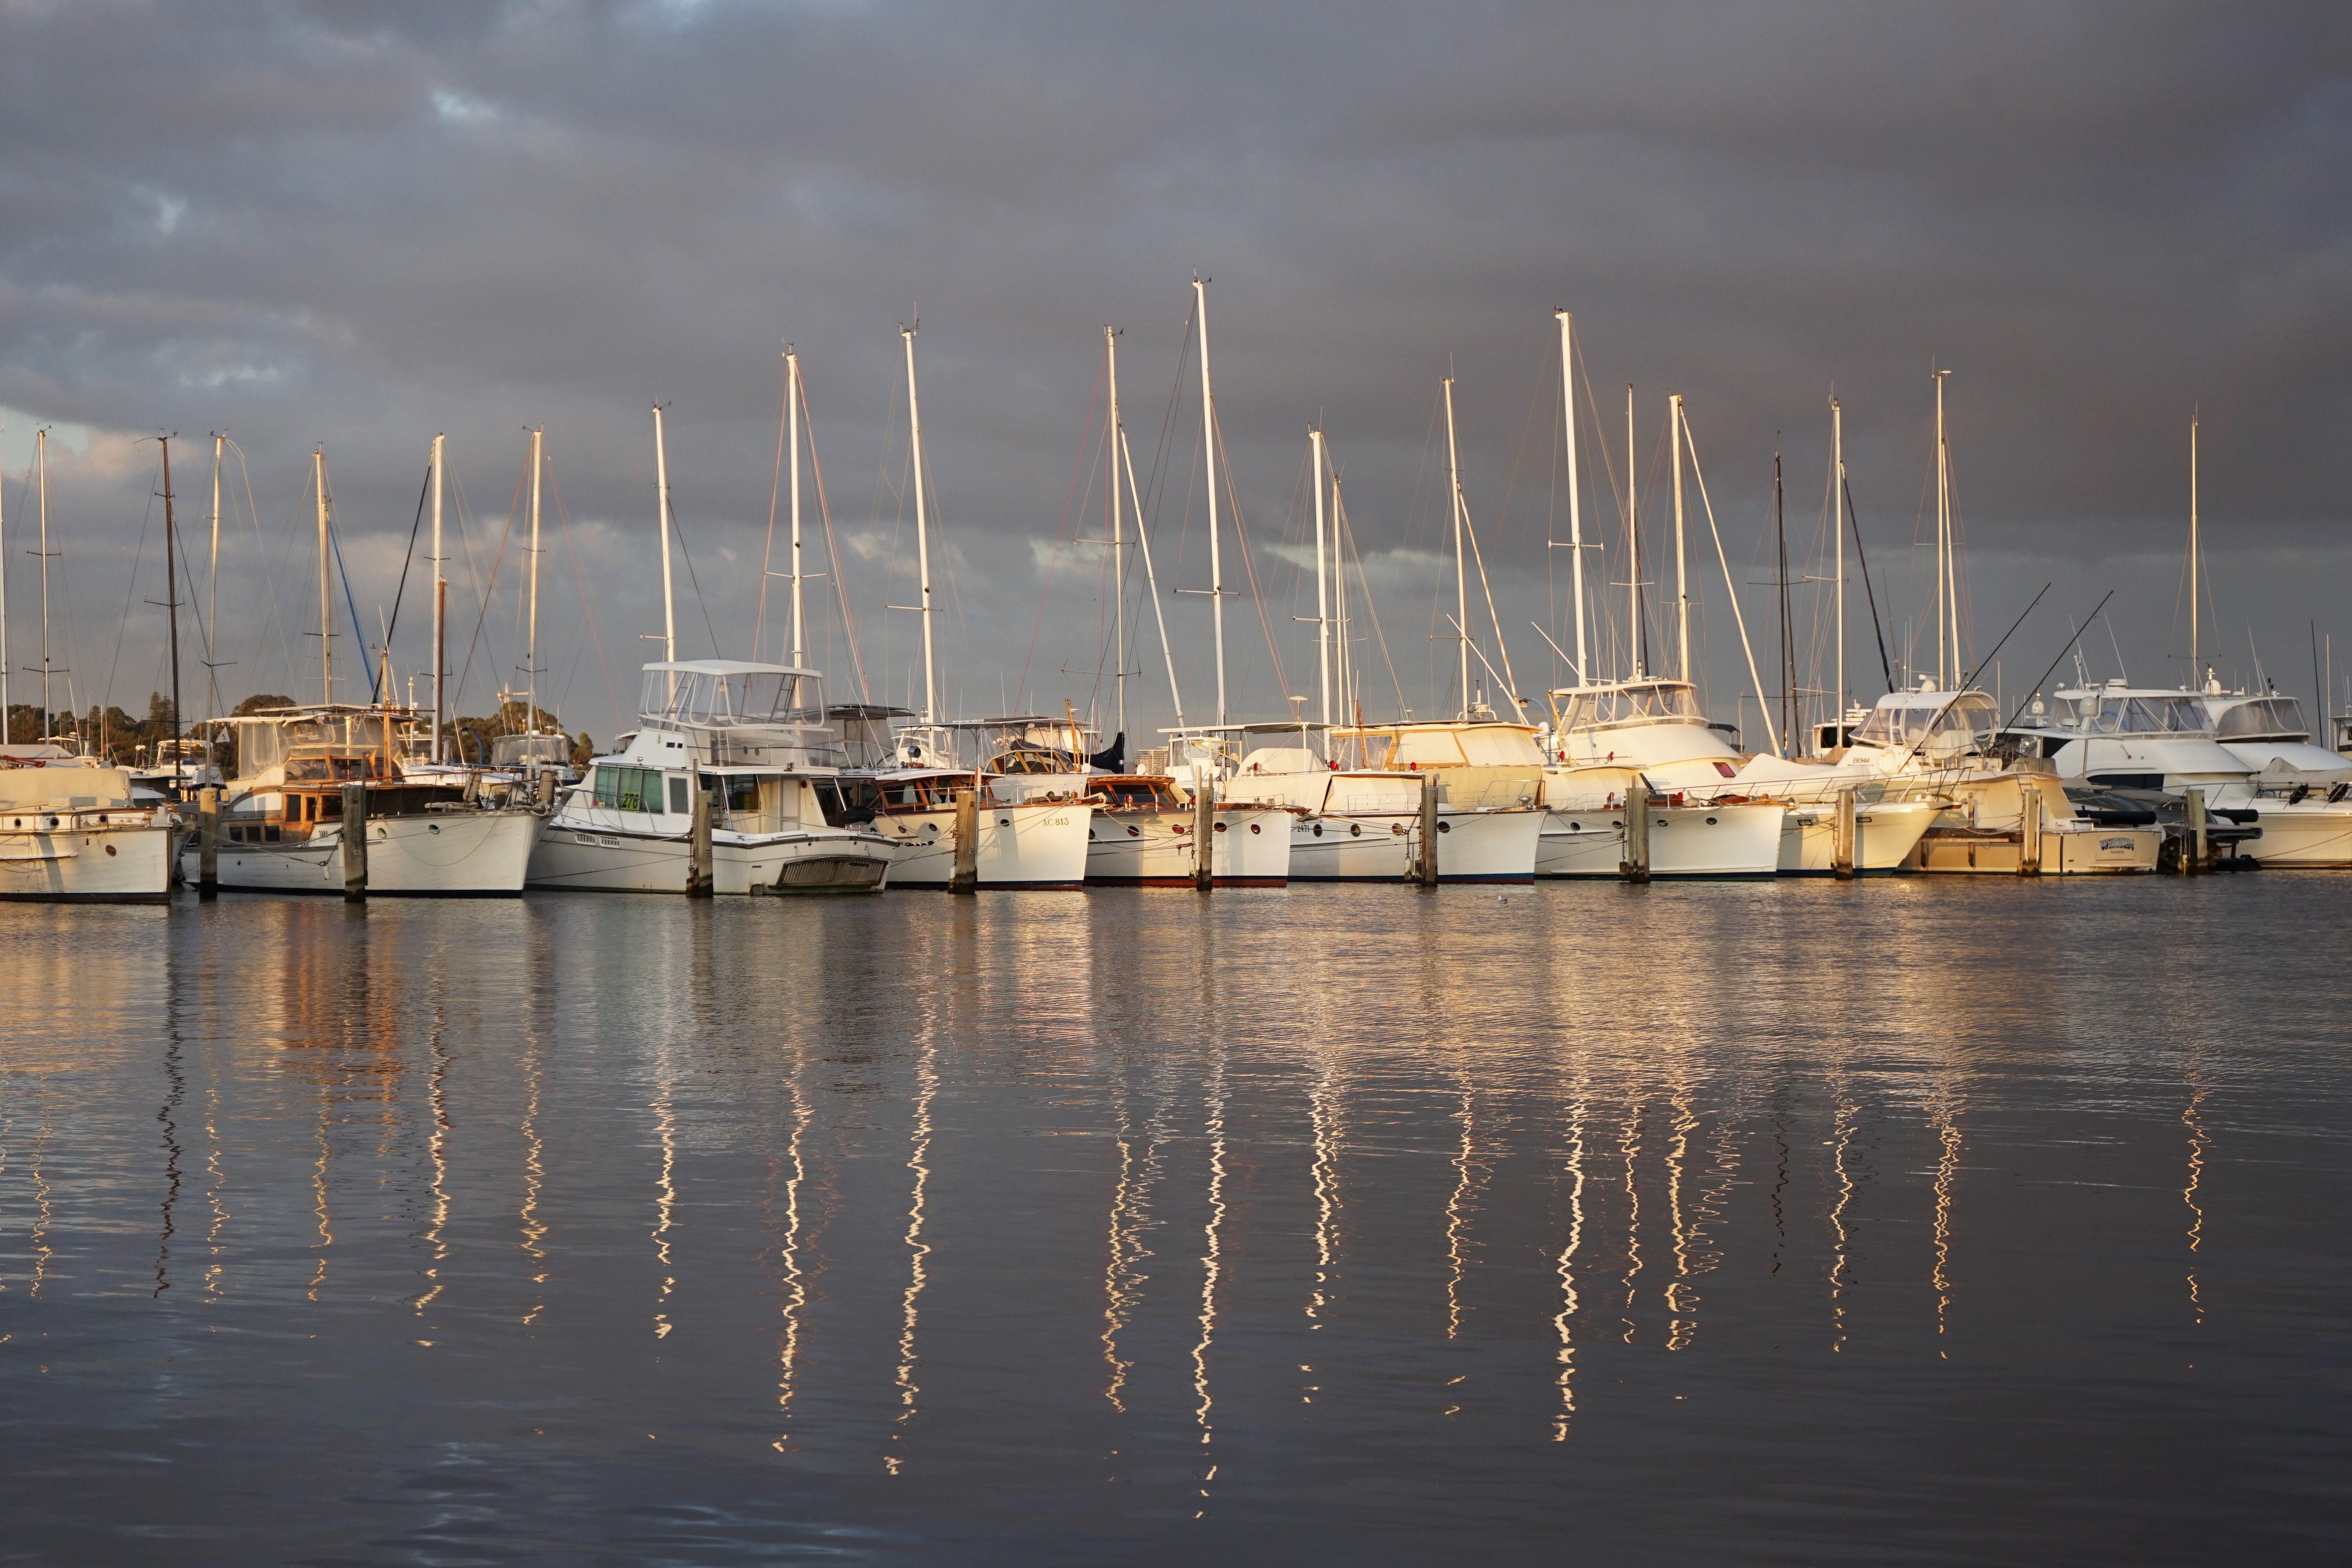 Boats anchored at Peppermint Grove, Western Australia.